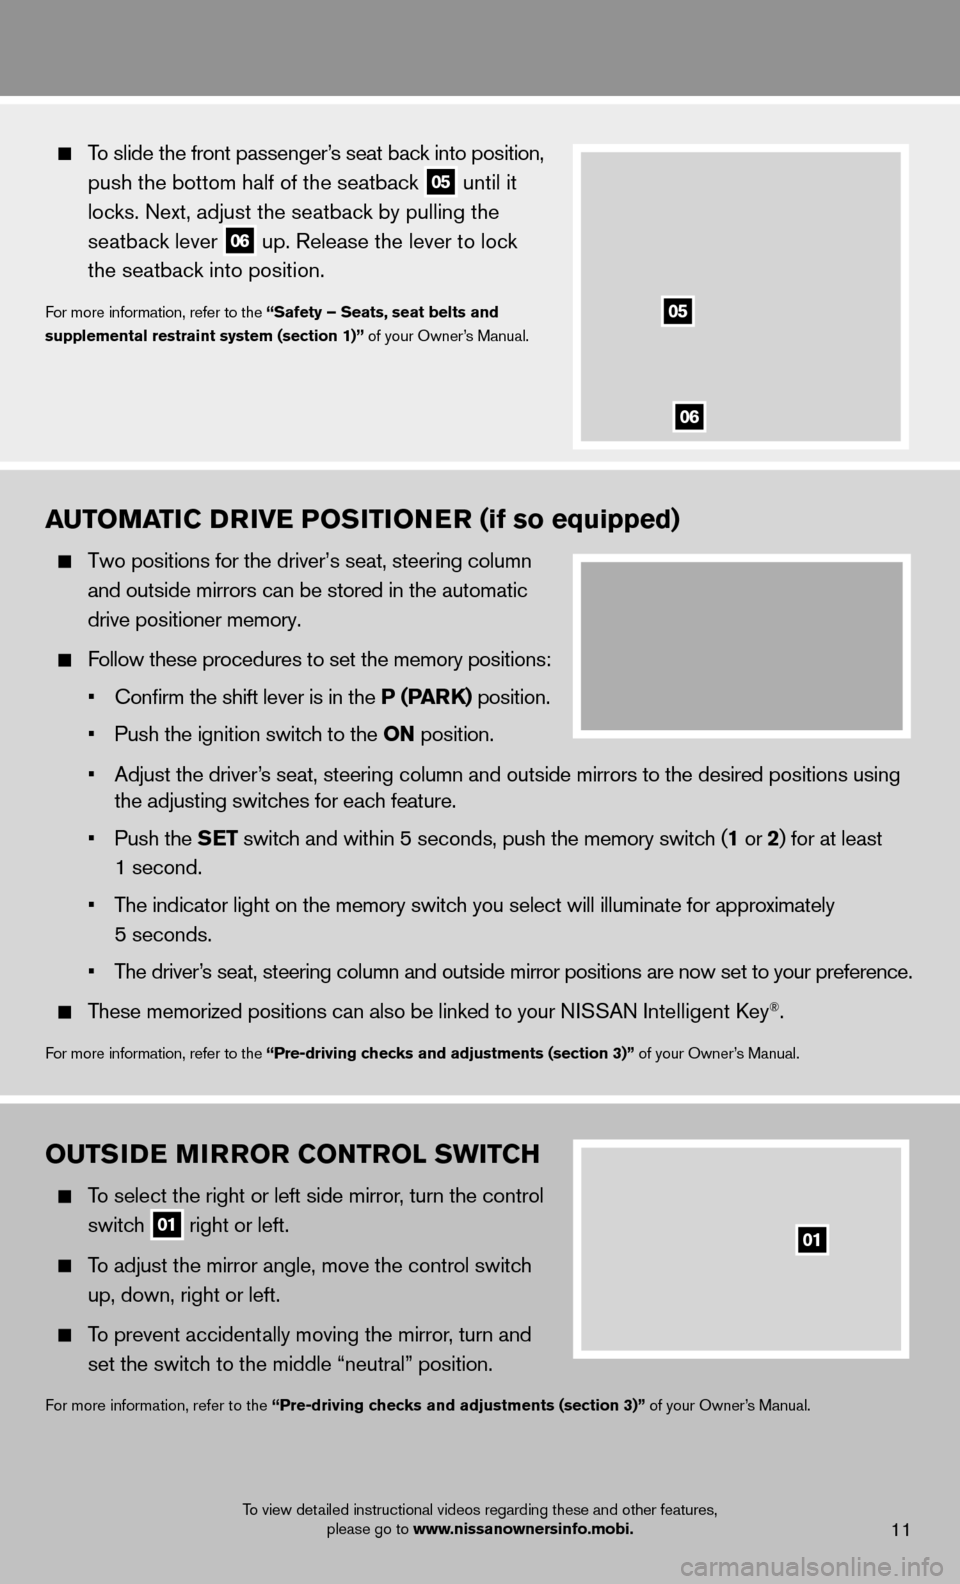 NISSAN MURANO 2013 2.G Quick Reference Guide 11
OUTSIDE MIRROR CONTROL SWITCH
   To select the right or left side mirror, turn the control 
   switch  
01 right or left.
 
  To adjust the mirror angle, move the control switch
    up, down, right